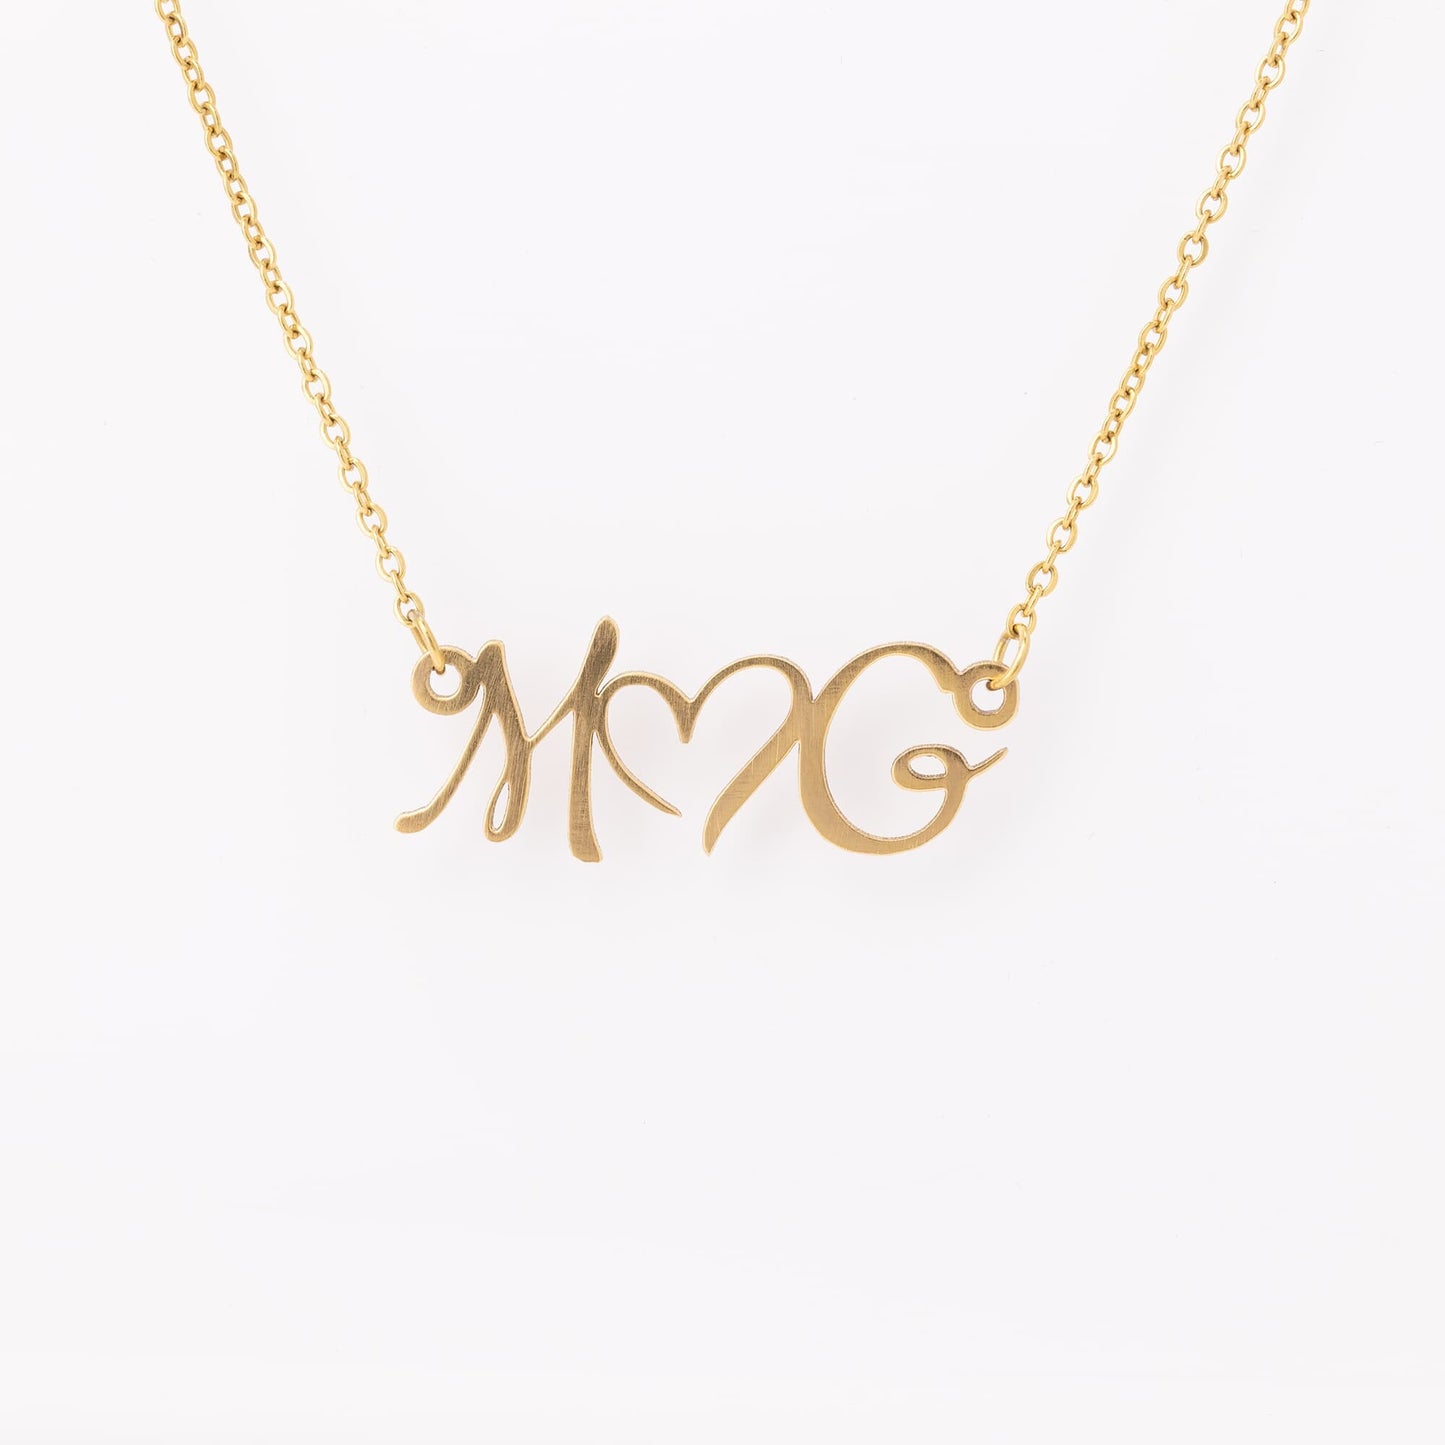 A Necklace For Lovers or Best Friends - Two Initials Joined By A Heart